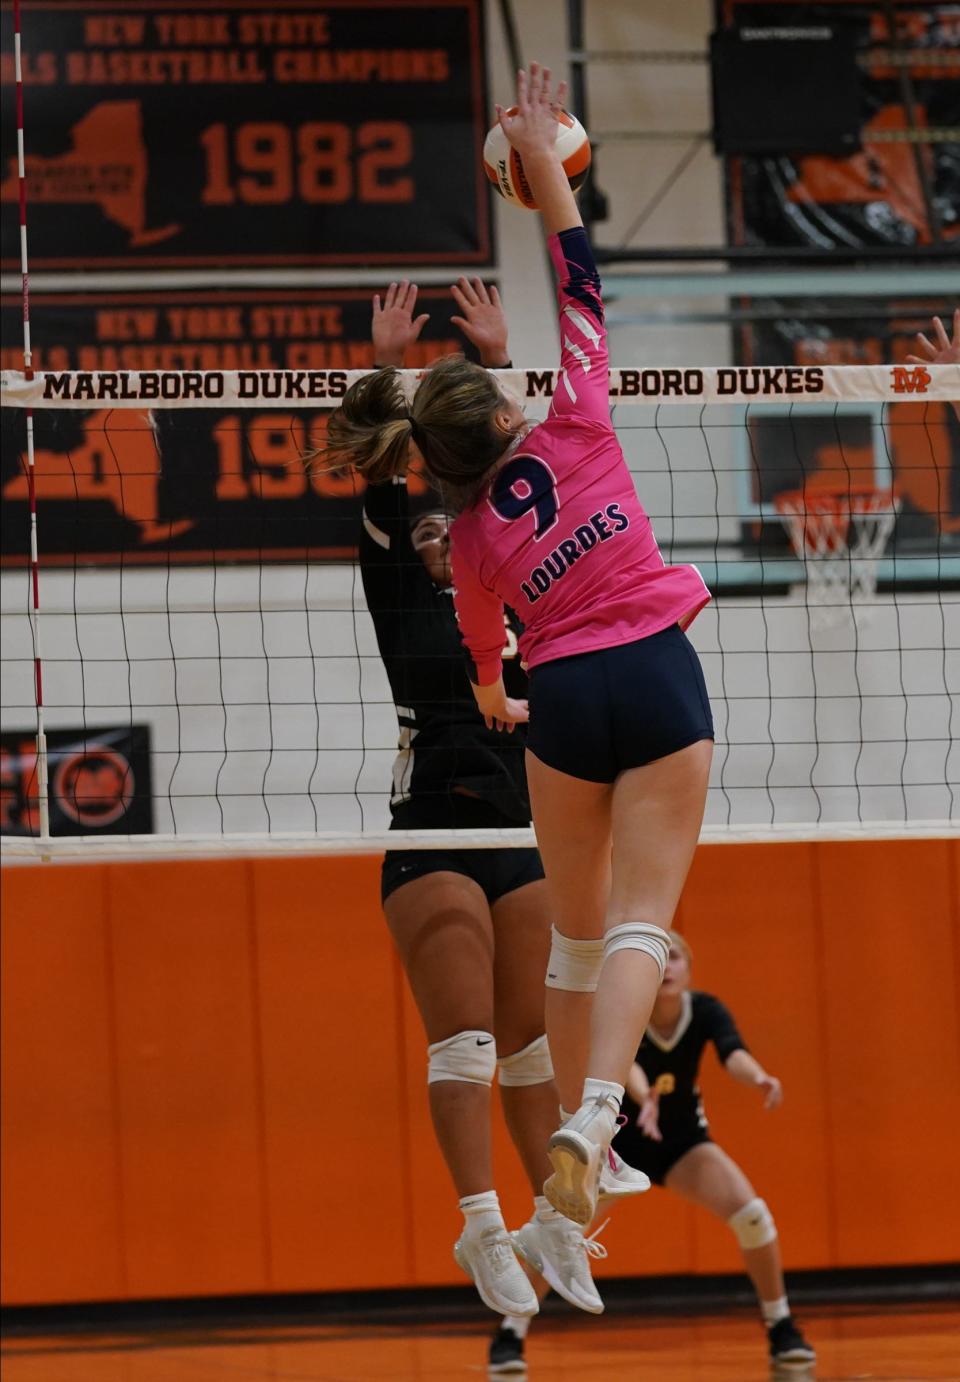 Lourdes' Madison Tegeler (9) works a shot over the net during their 3-1 win over Marlboro in volleyball action at Marlboro High School on Tuesday, October 11, 2022.